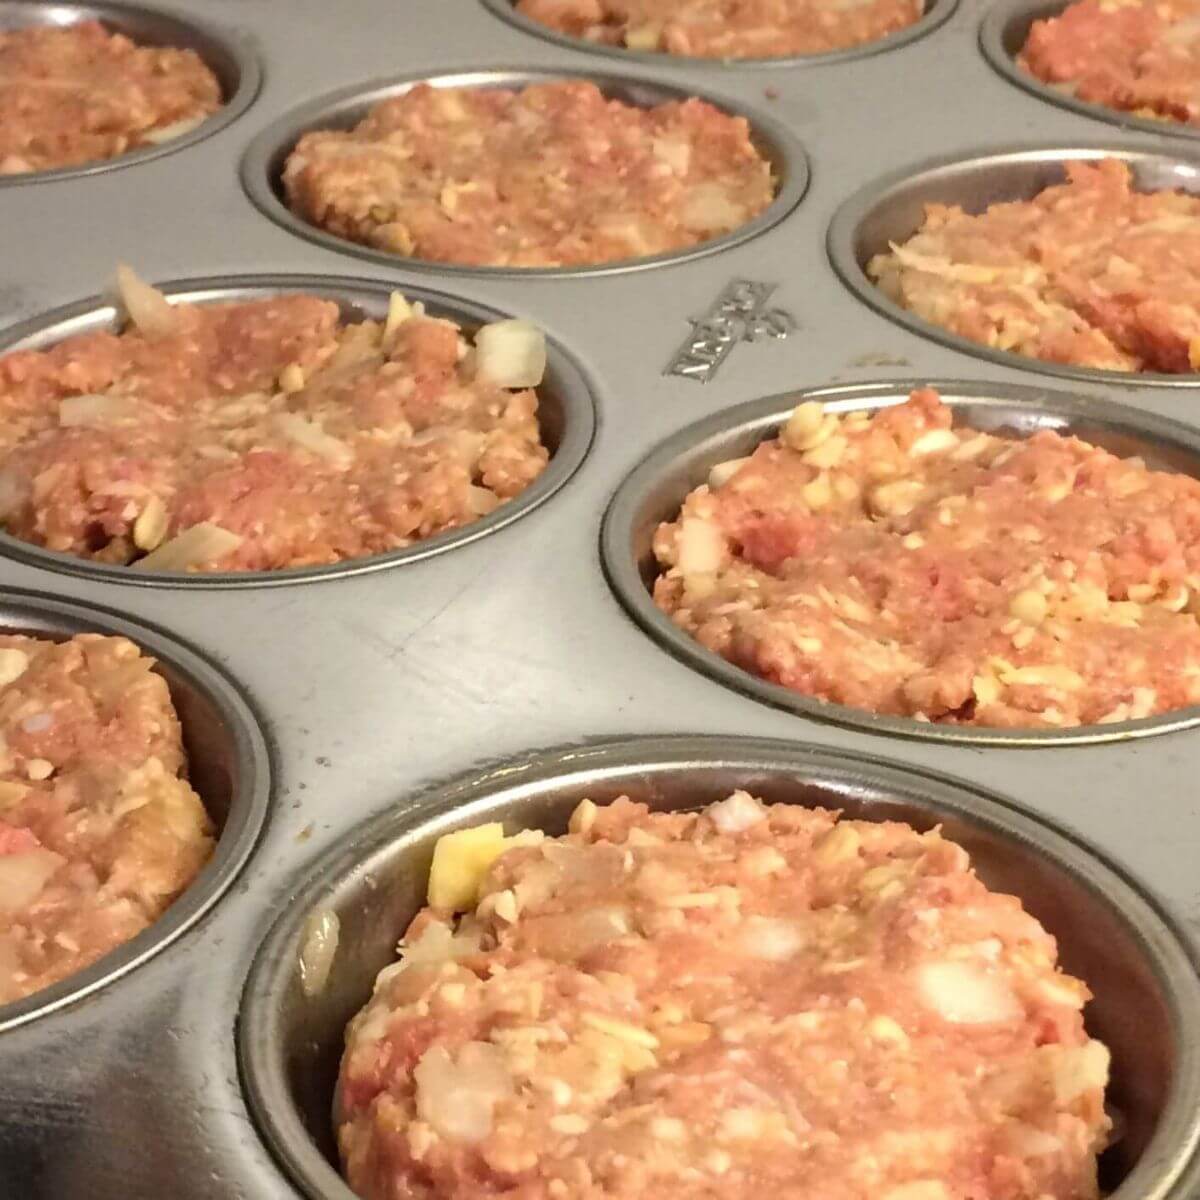 meatloaf mixture pressed into stainless steel muffin tin cups